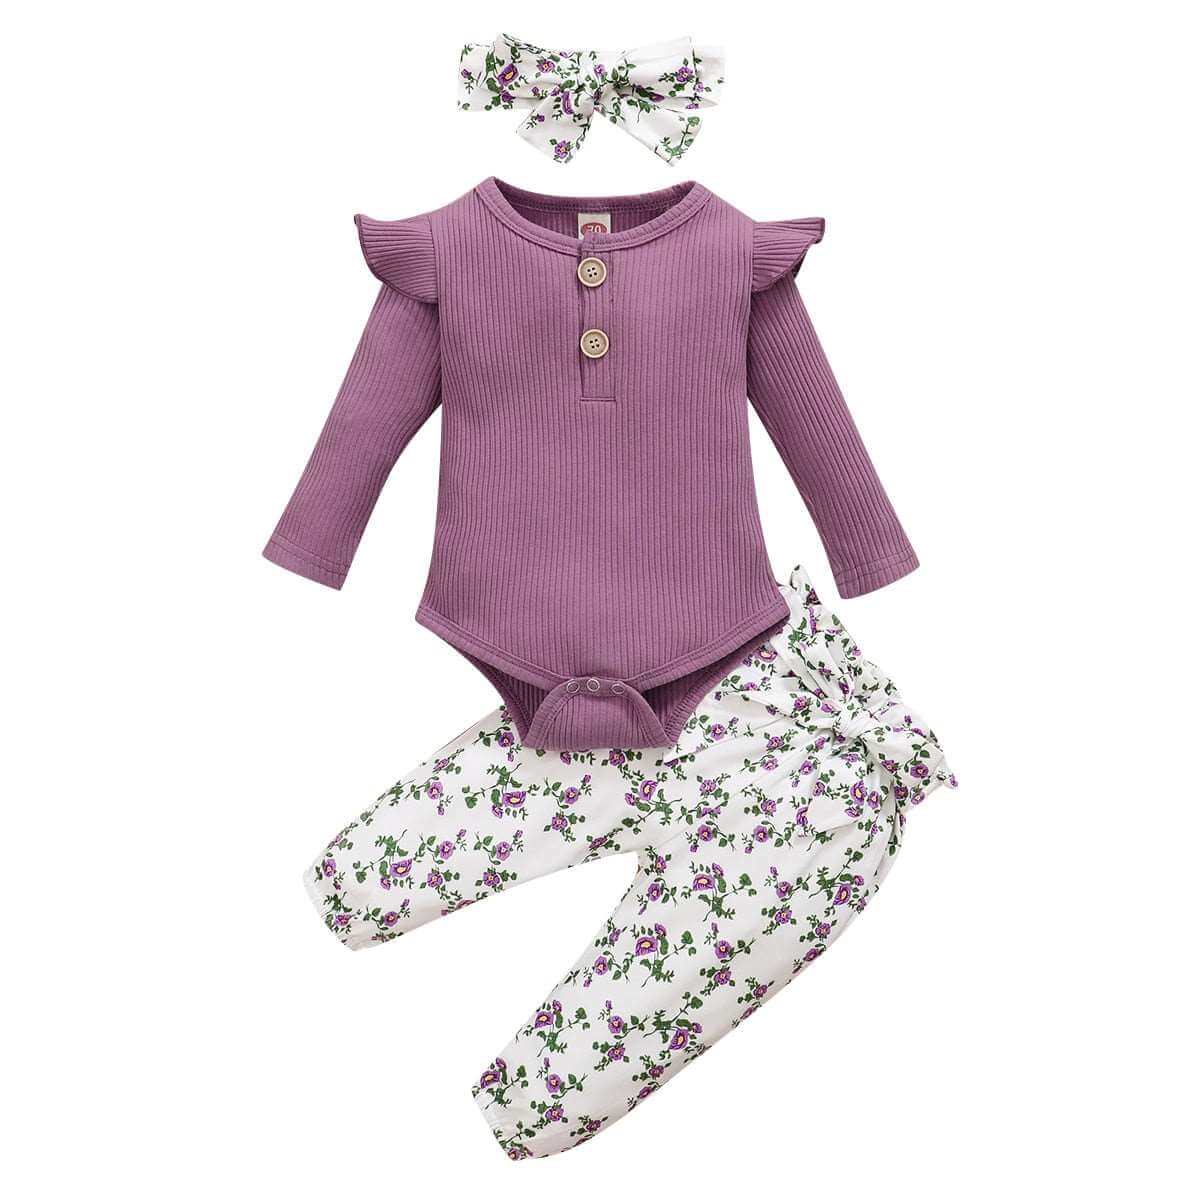 A formal baby girl outfit set from OleOle, consisting of three pieces of cloth, suitable for ages one to two years.